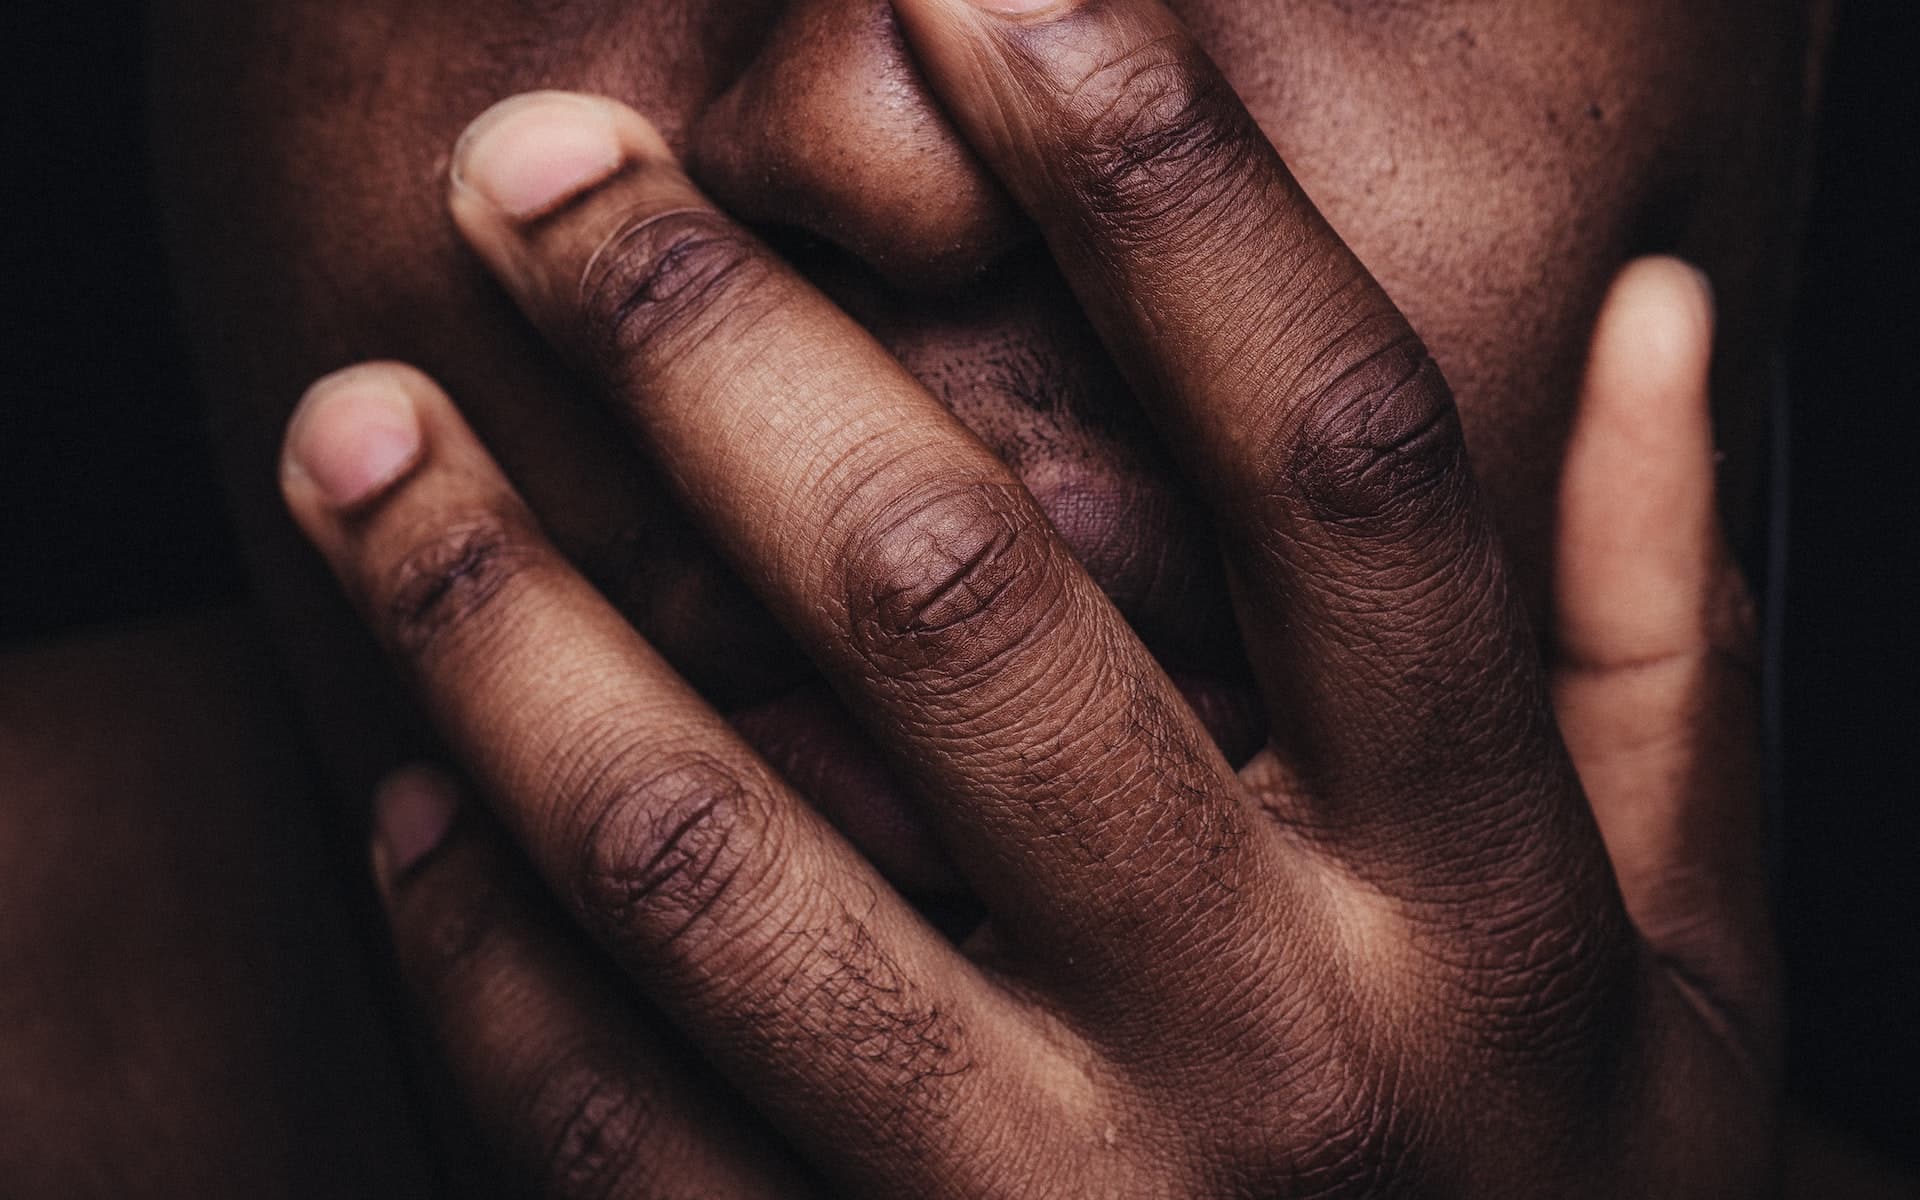 a black person holding hand to face